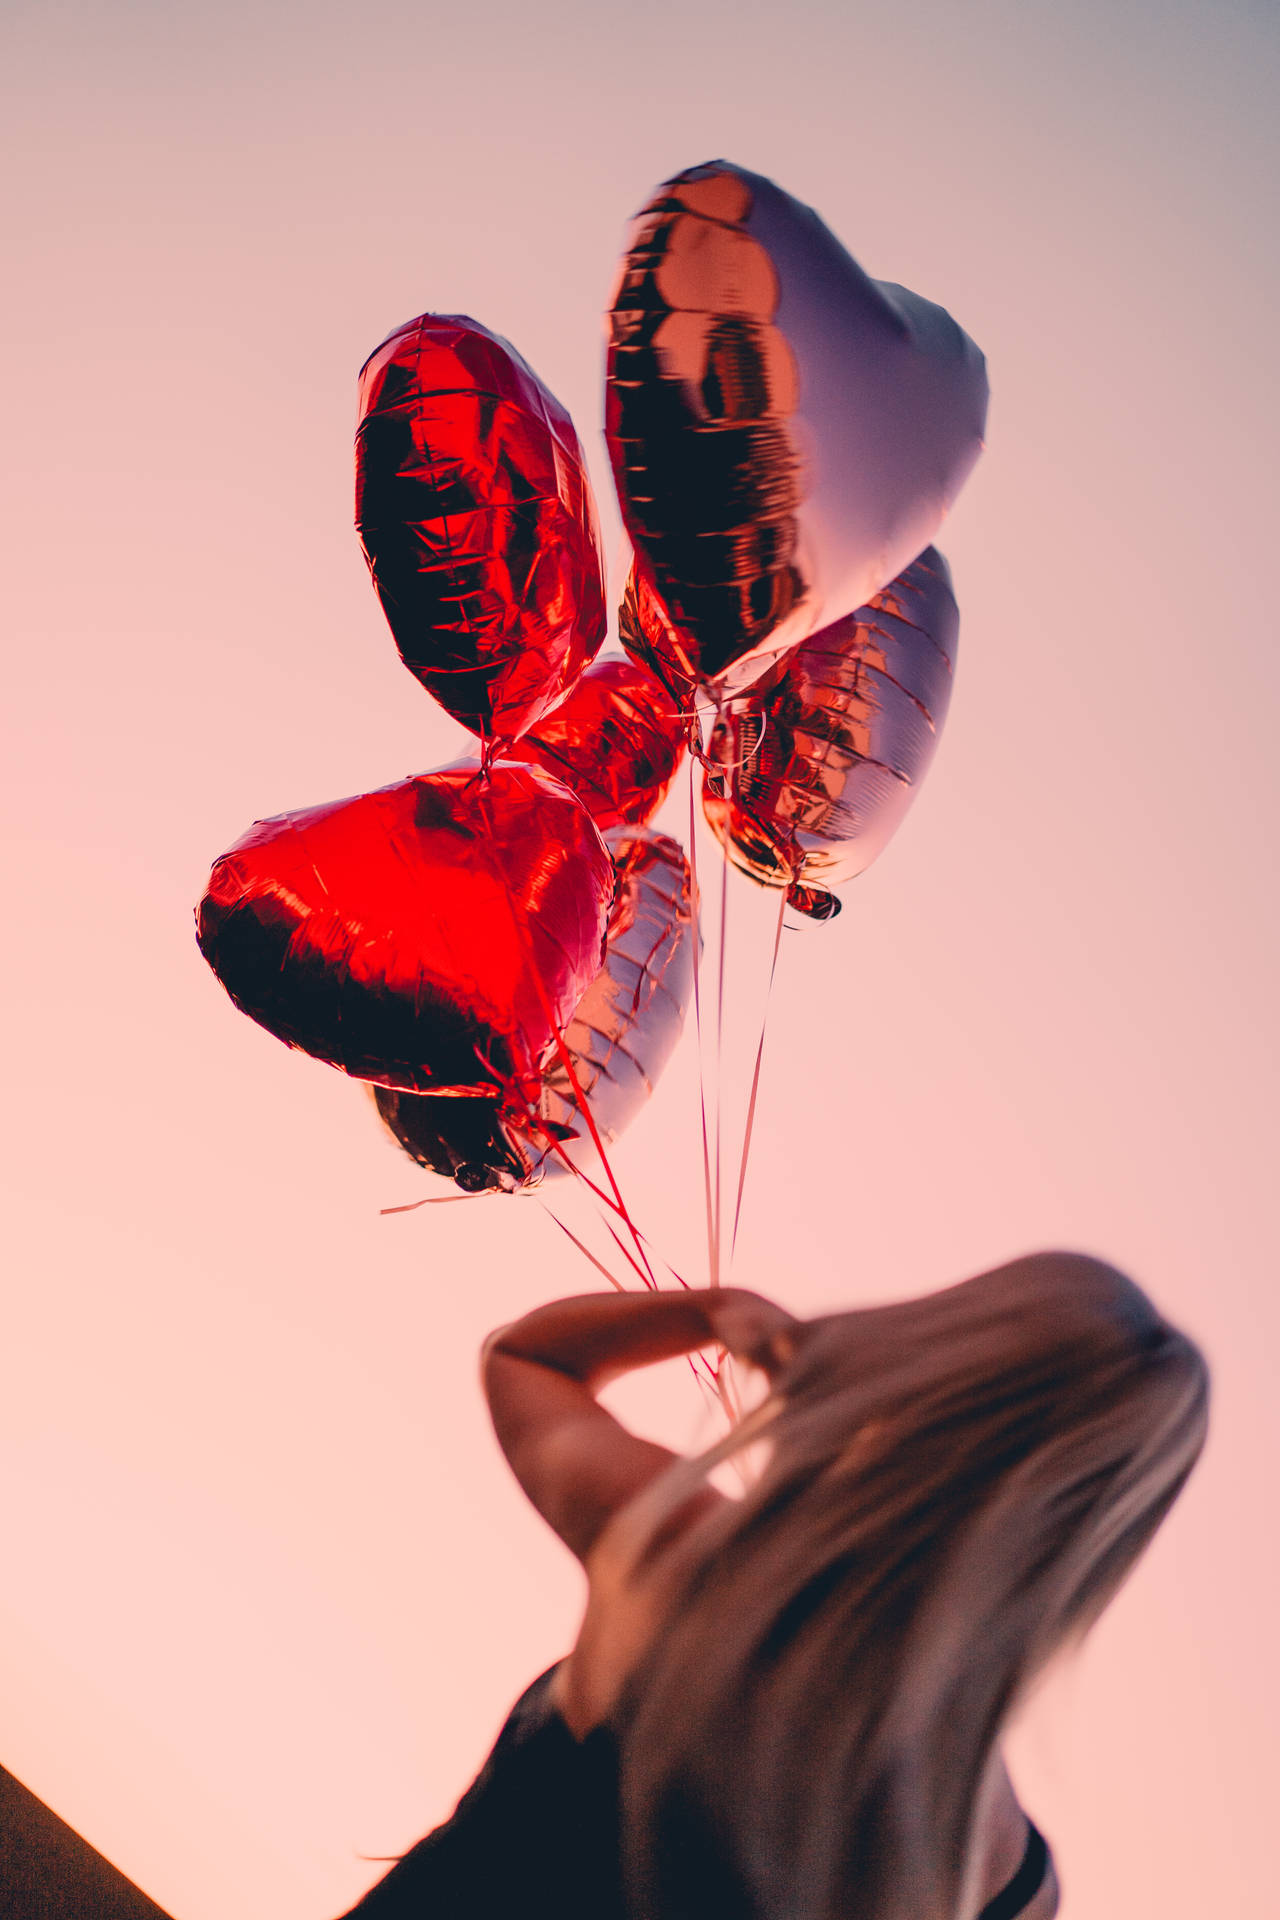 Aesthetic Heart Balloons Outdoors Background